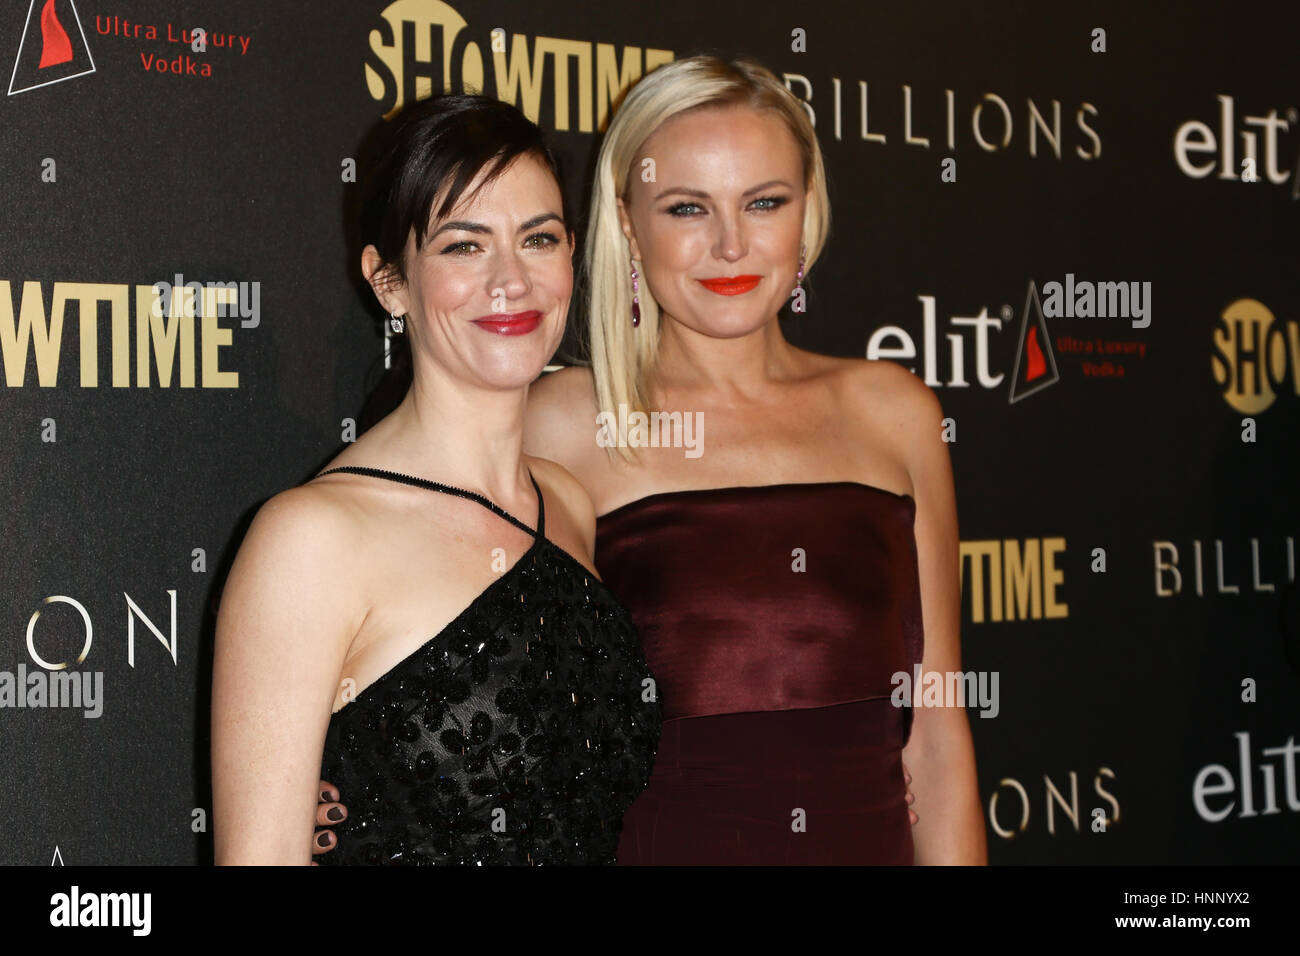 Actresses Maggie Siff (L) and Malin Akerman attend the 'Billions' Season Two Premiere at Cipriani's on February 13, 2017 in New York City. Stock Photo